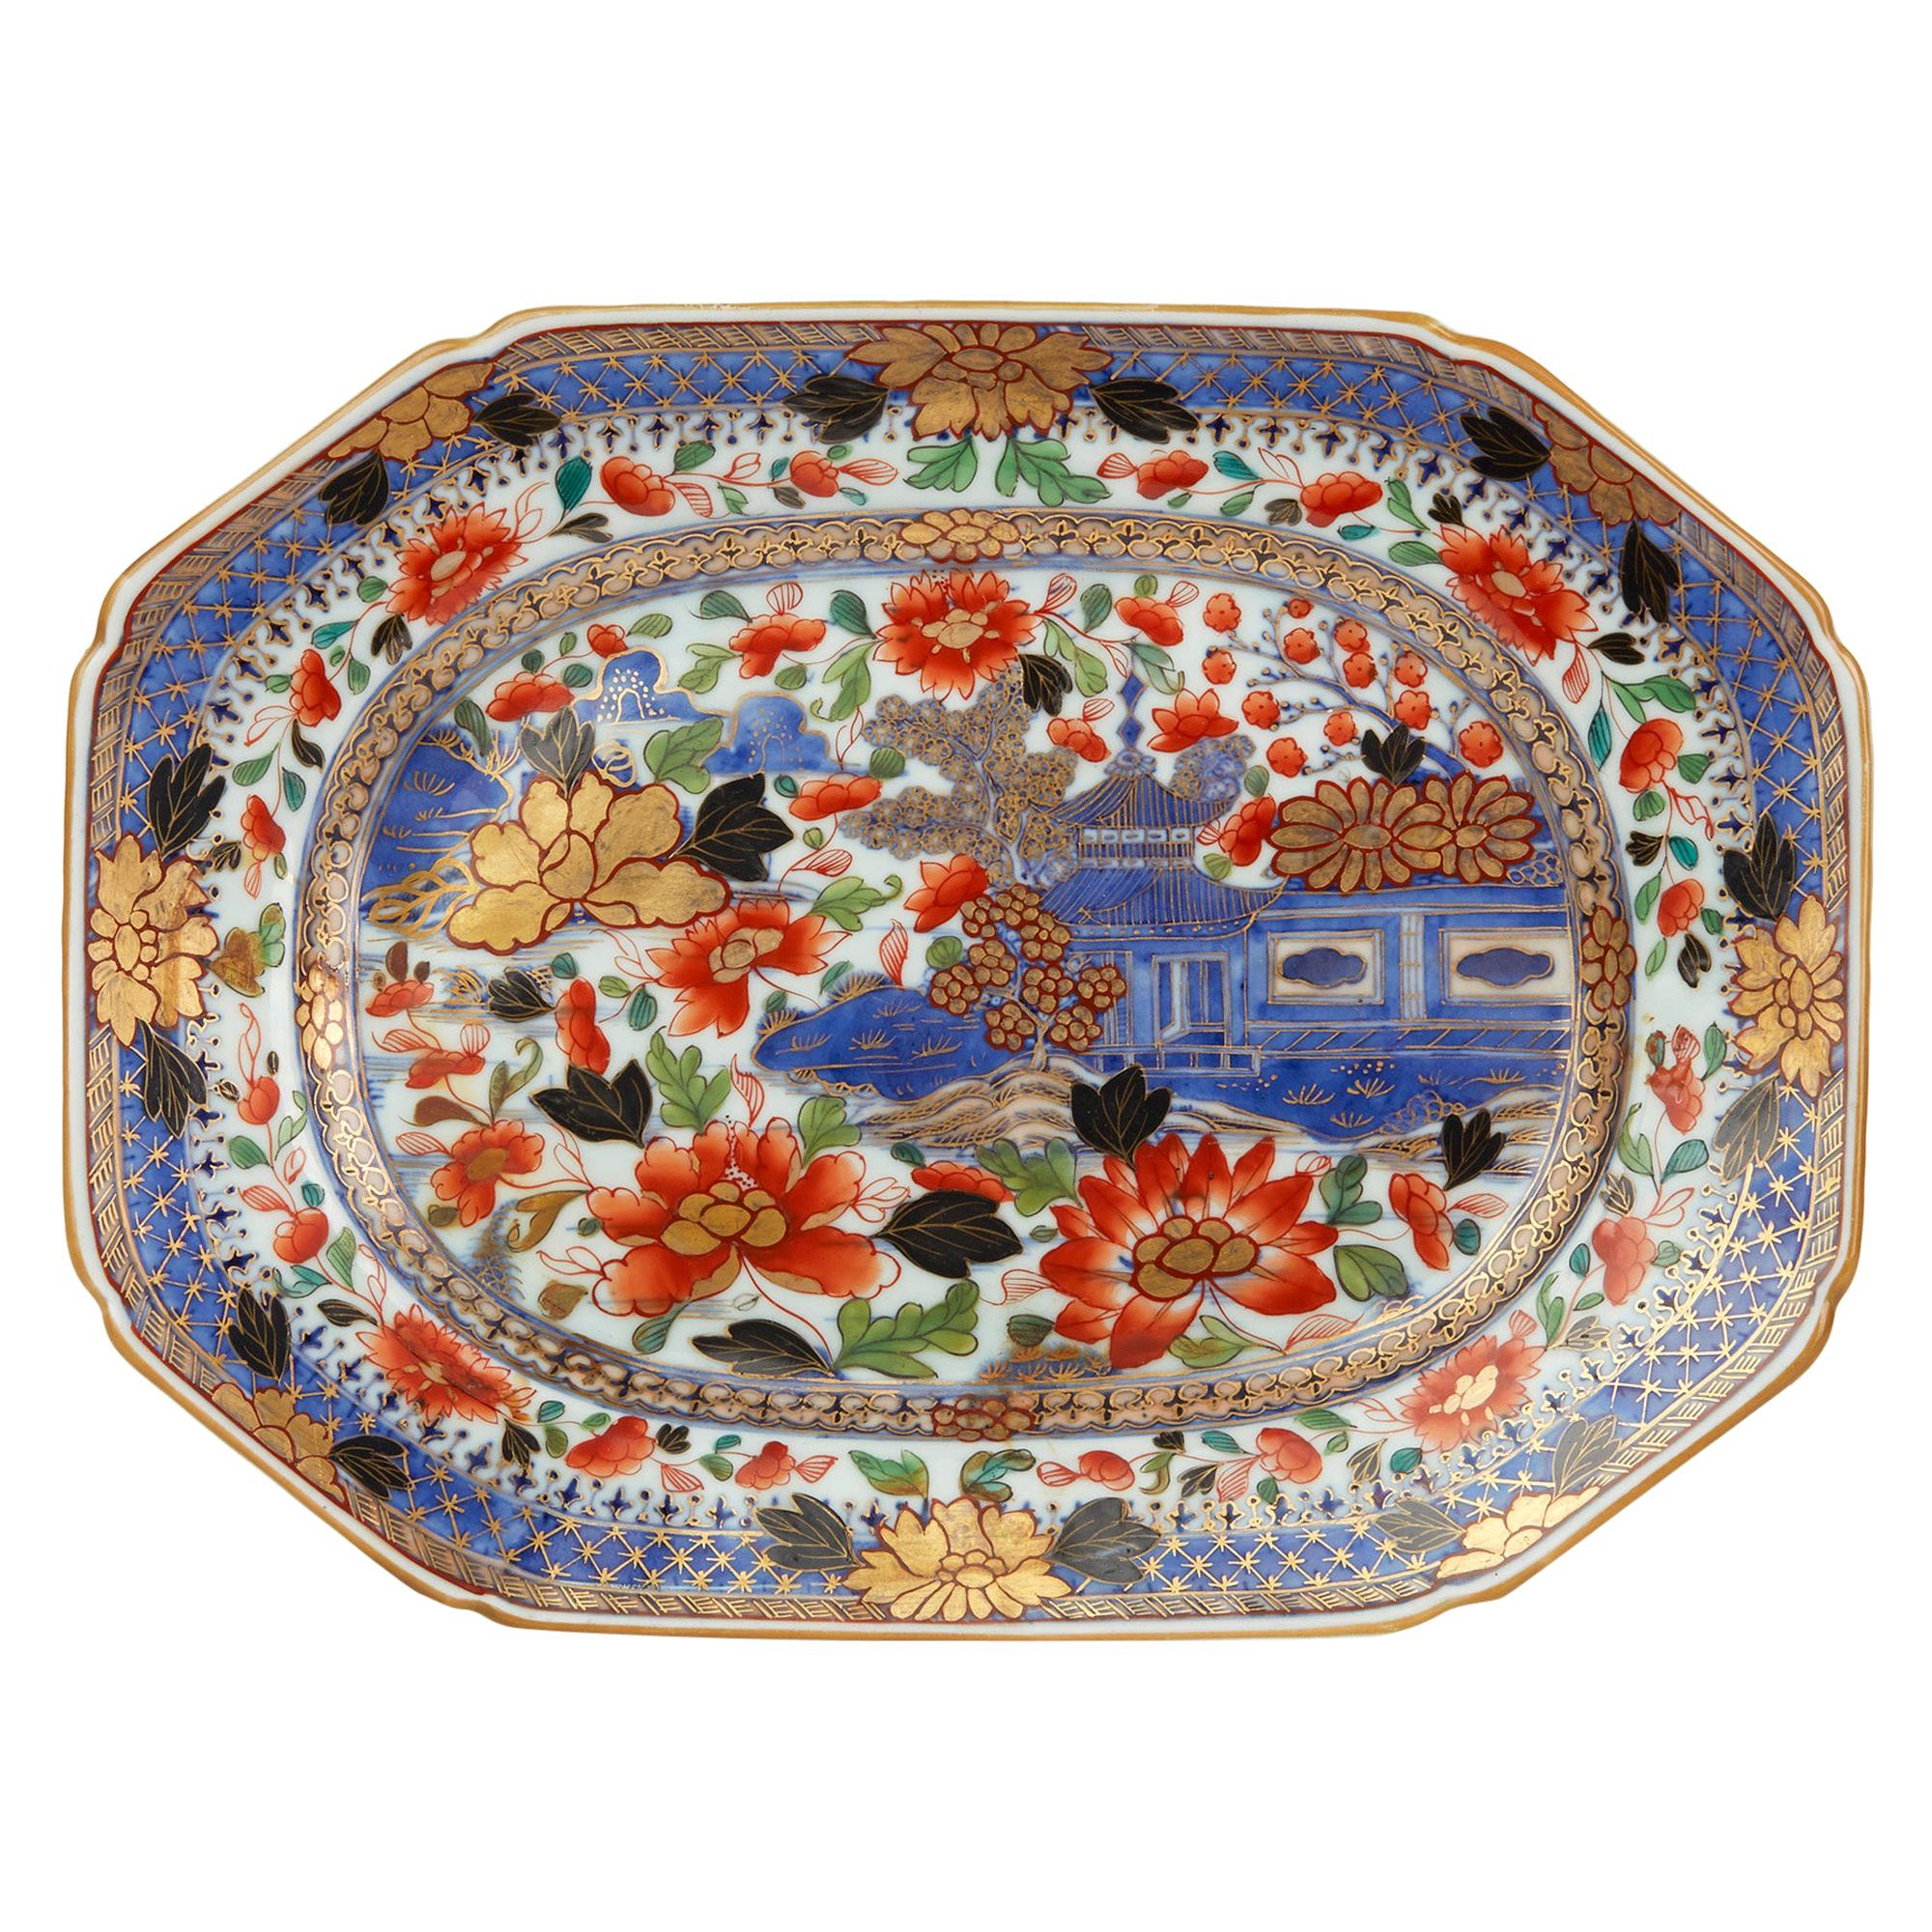 Exceptional Chinese Qianlong Porcelain Overpainted Serving Dish, circa 1760